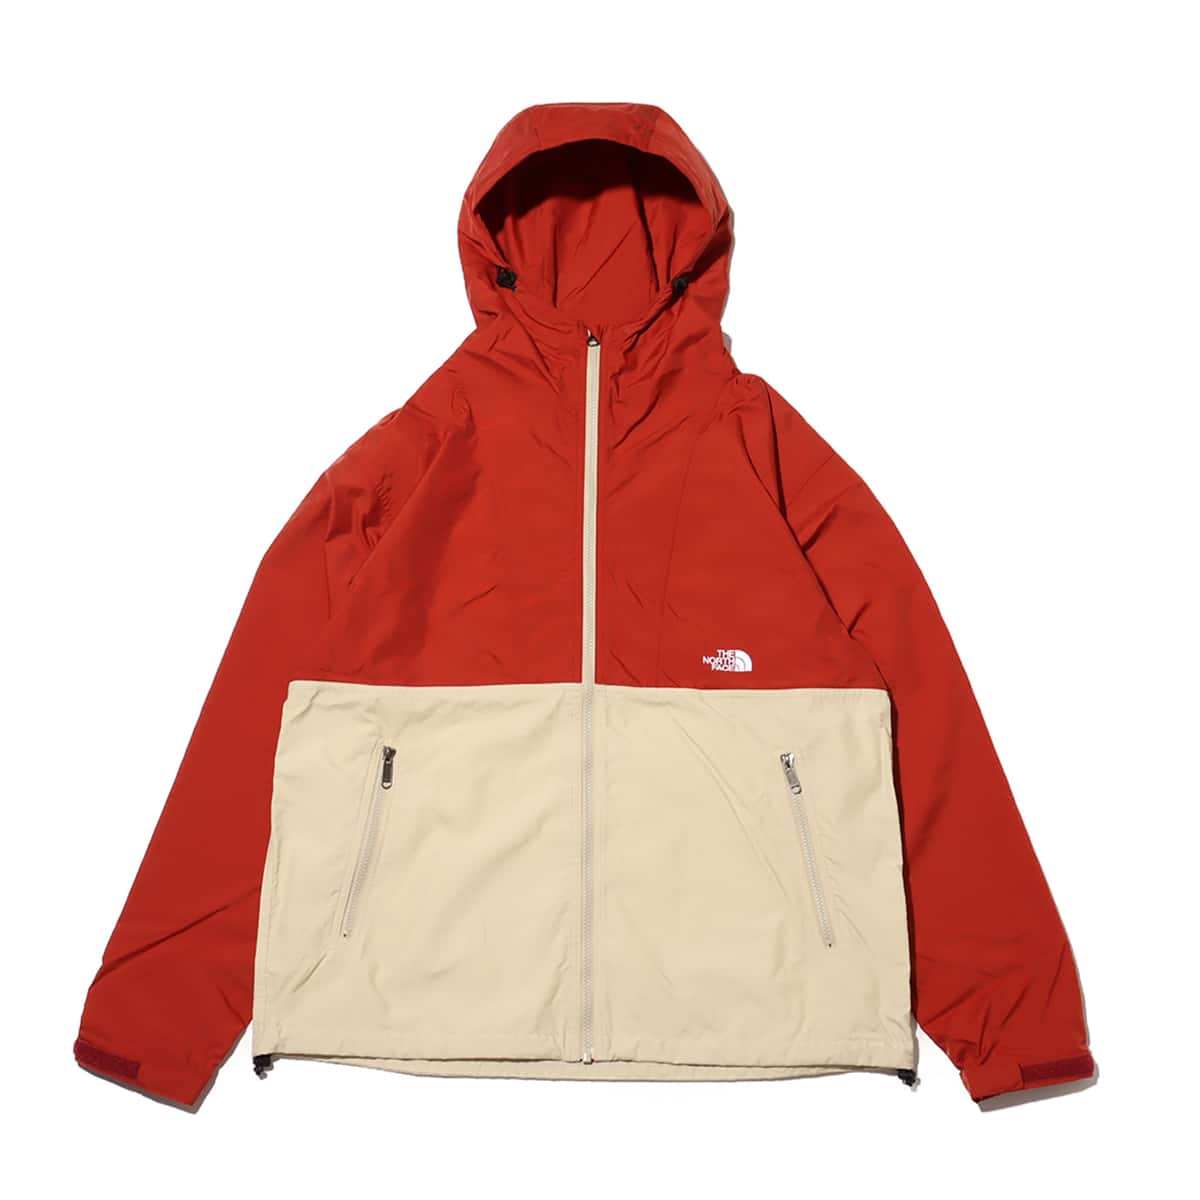 THE NORTH FACE Compact Jacket アイアンレッド×グラベル